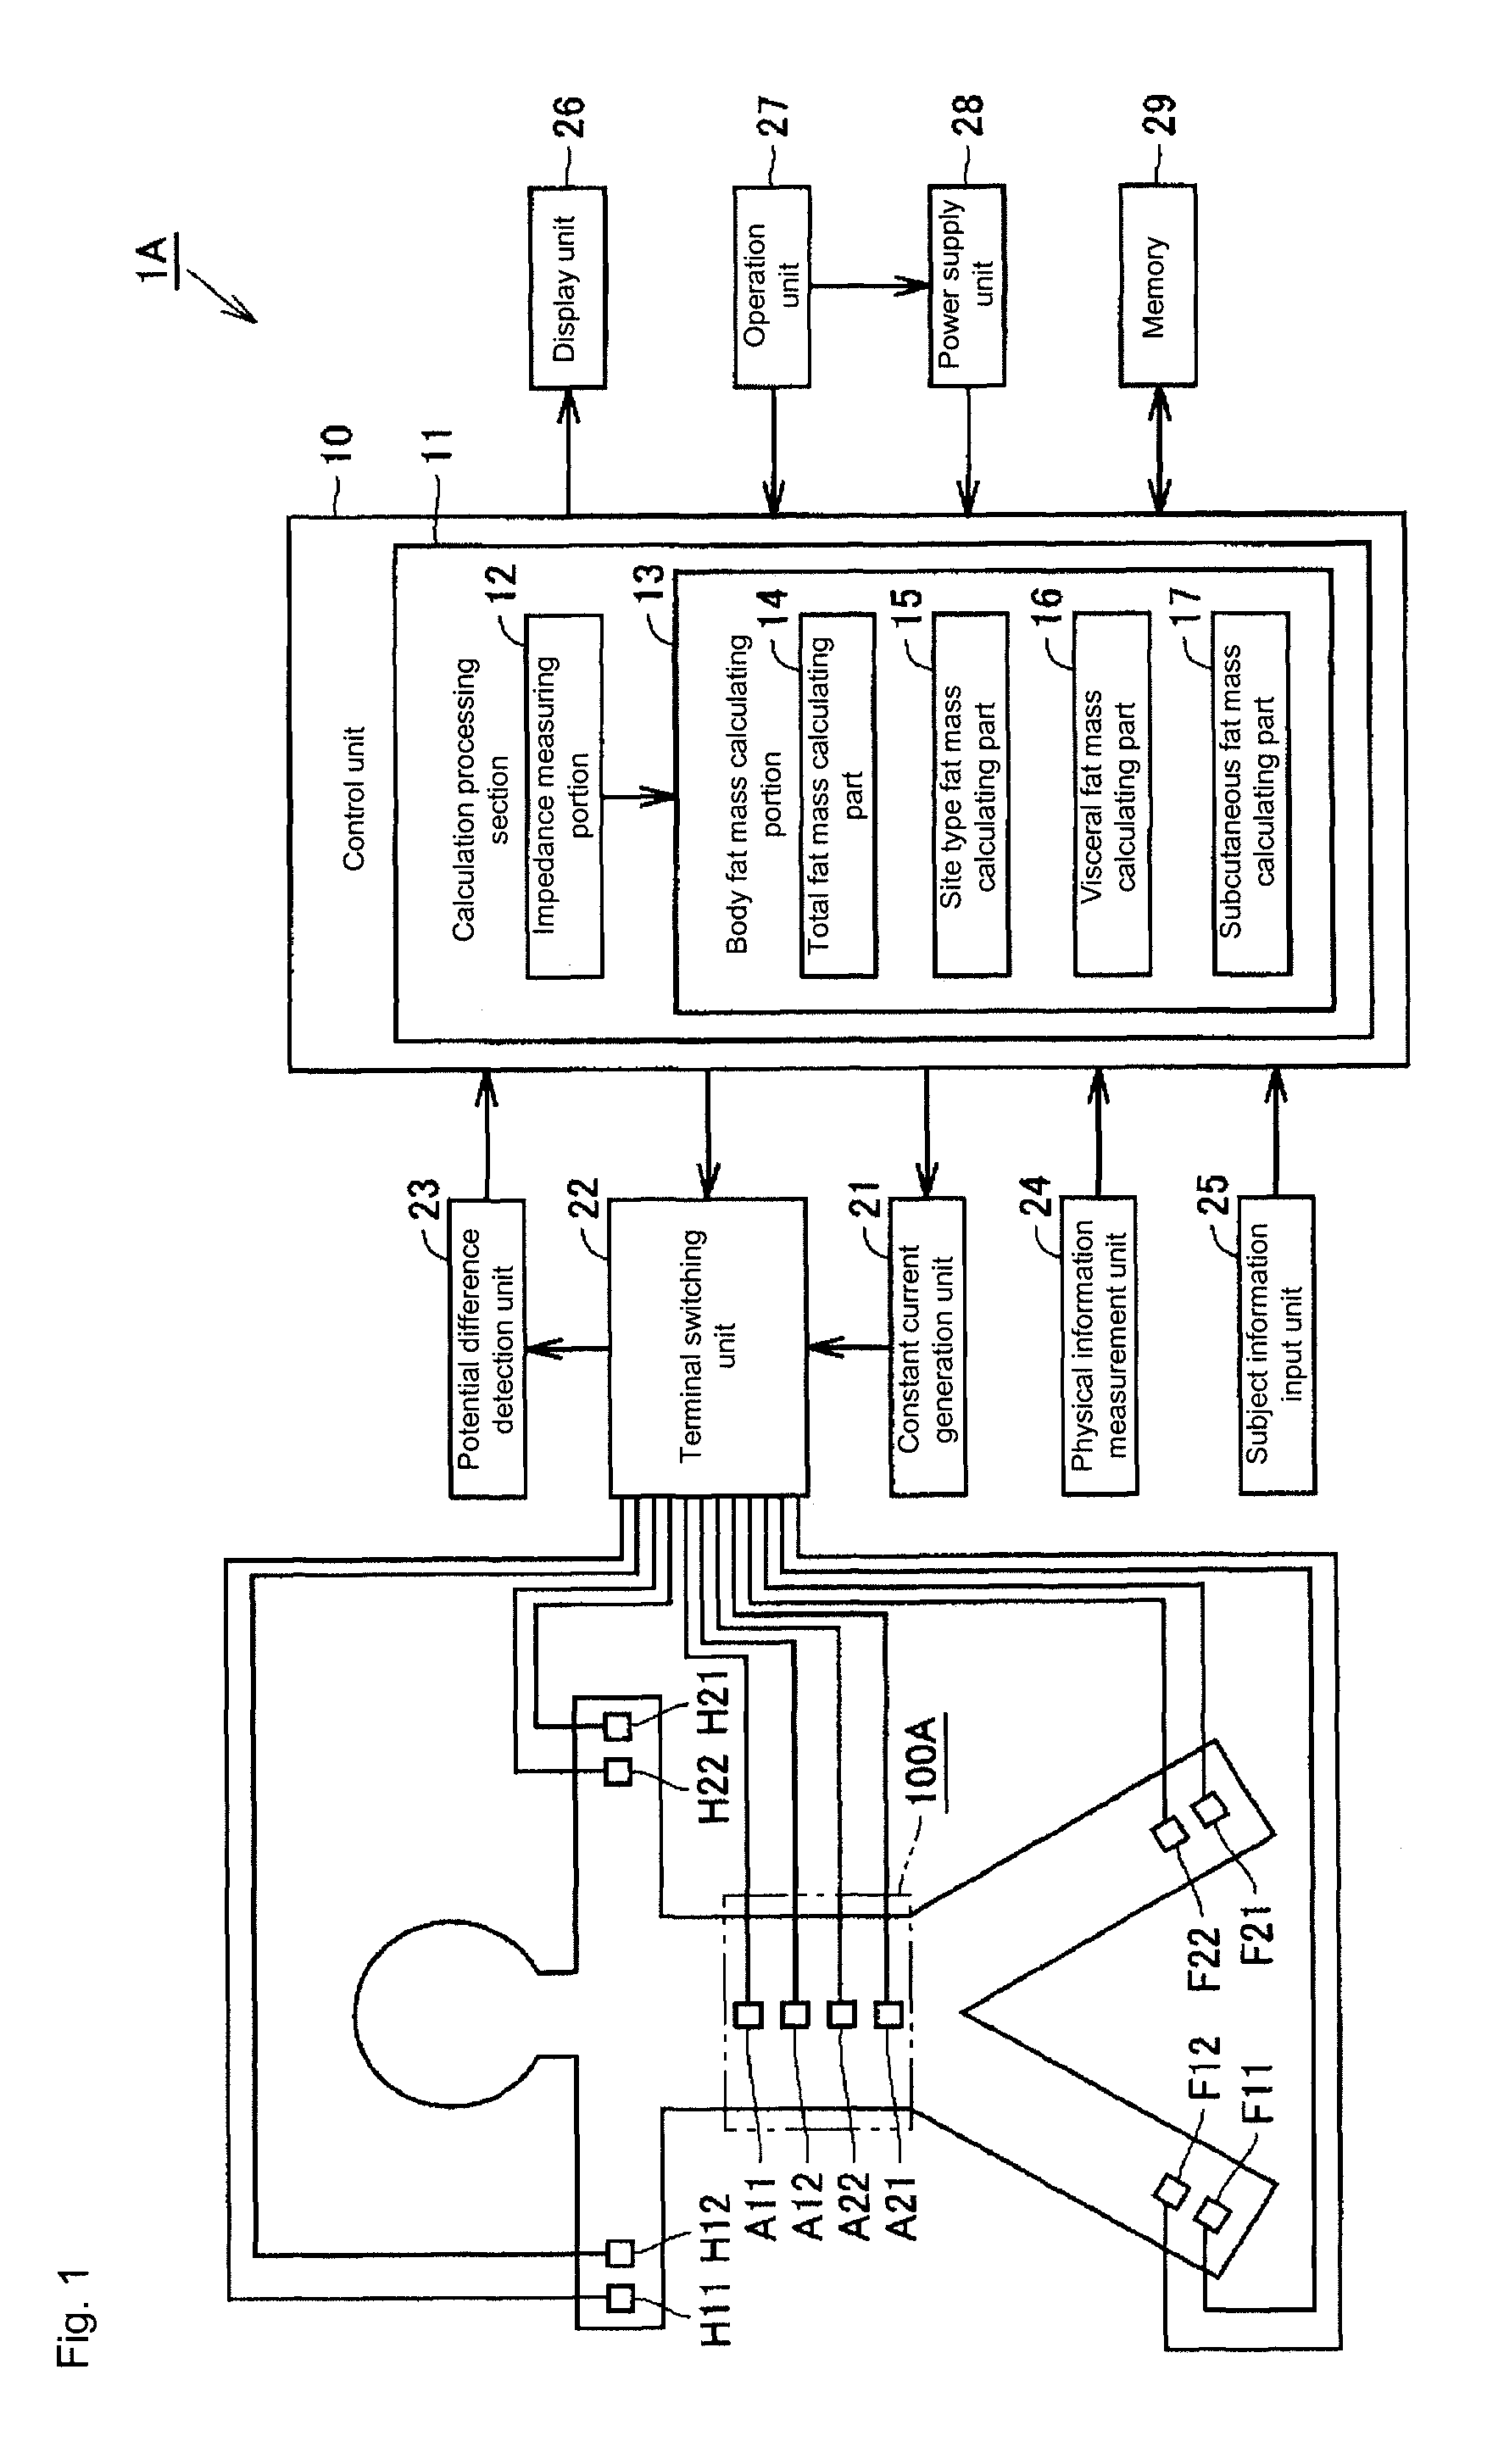 Bioelectrical impedance measurement body attachment unit and body fat measurement device